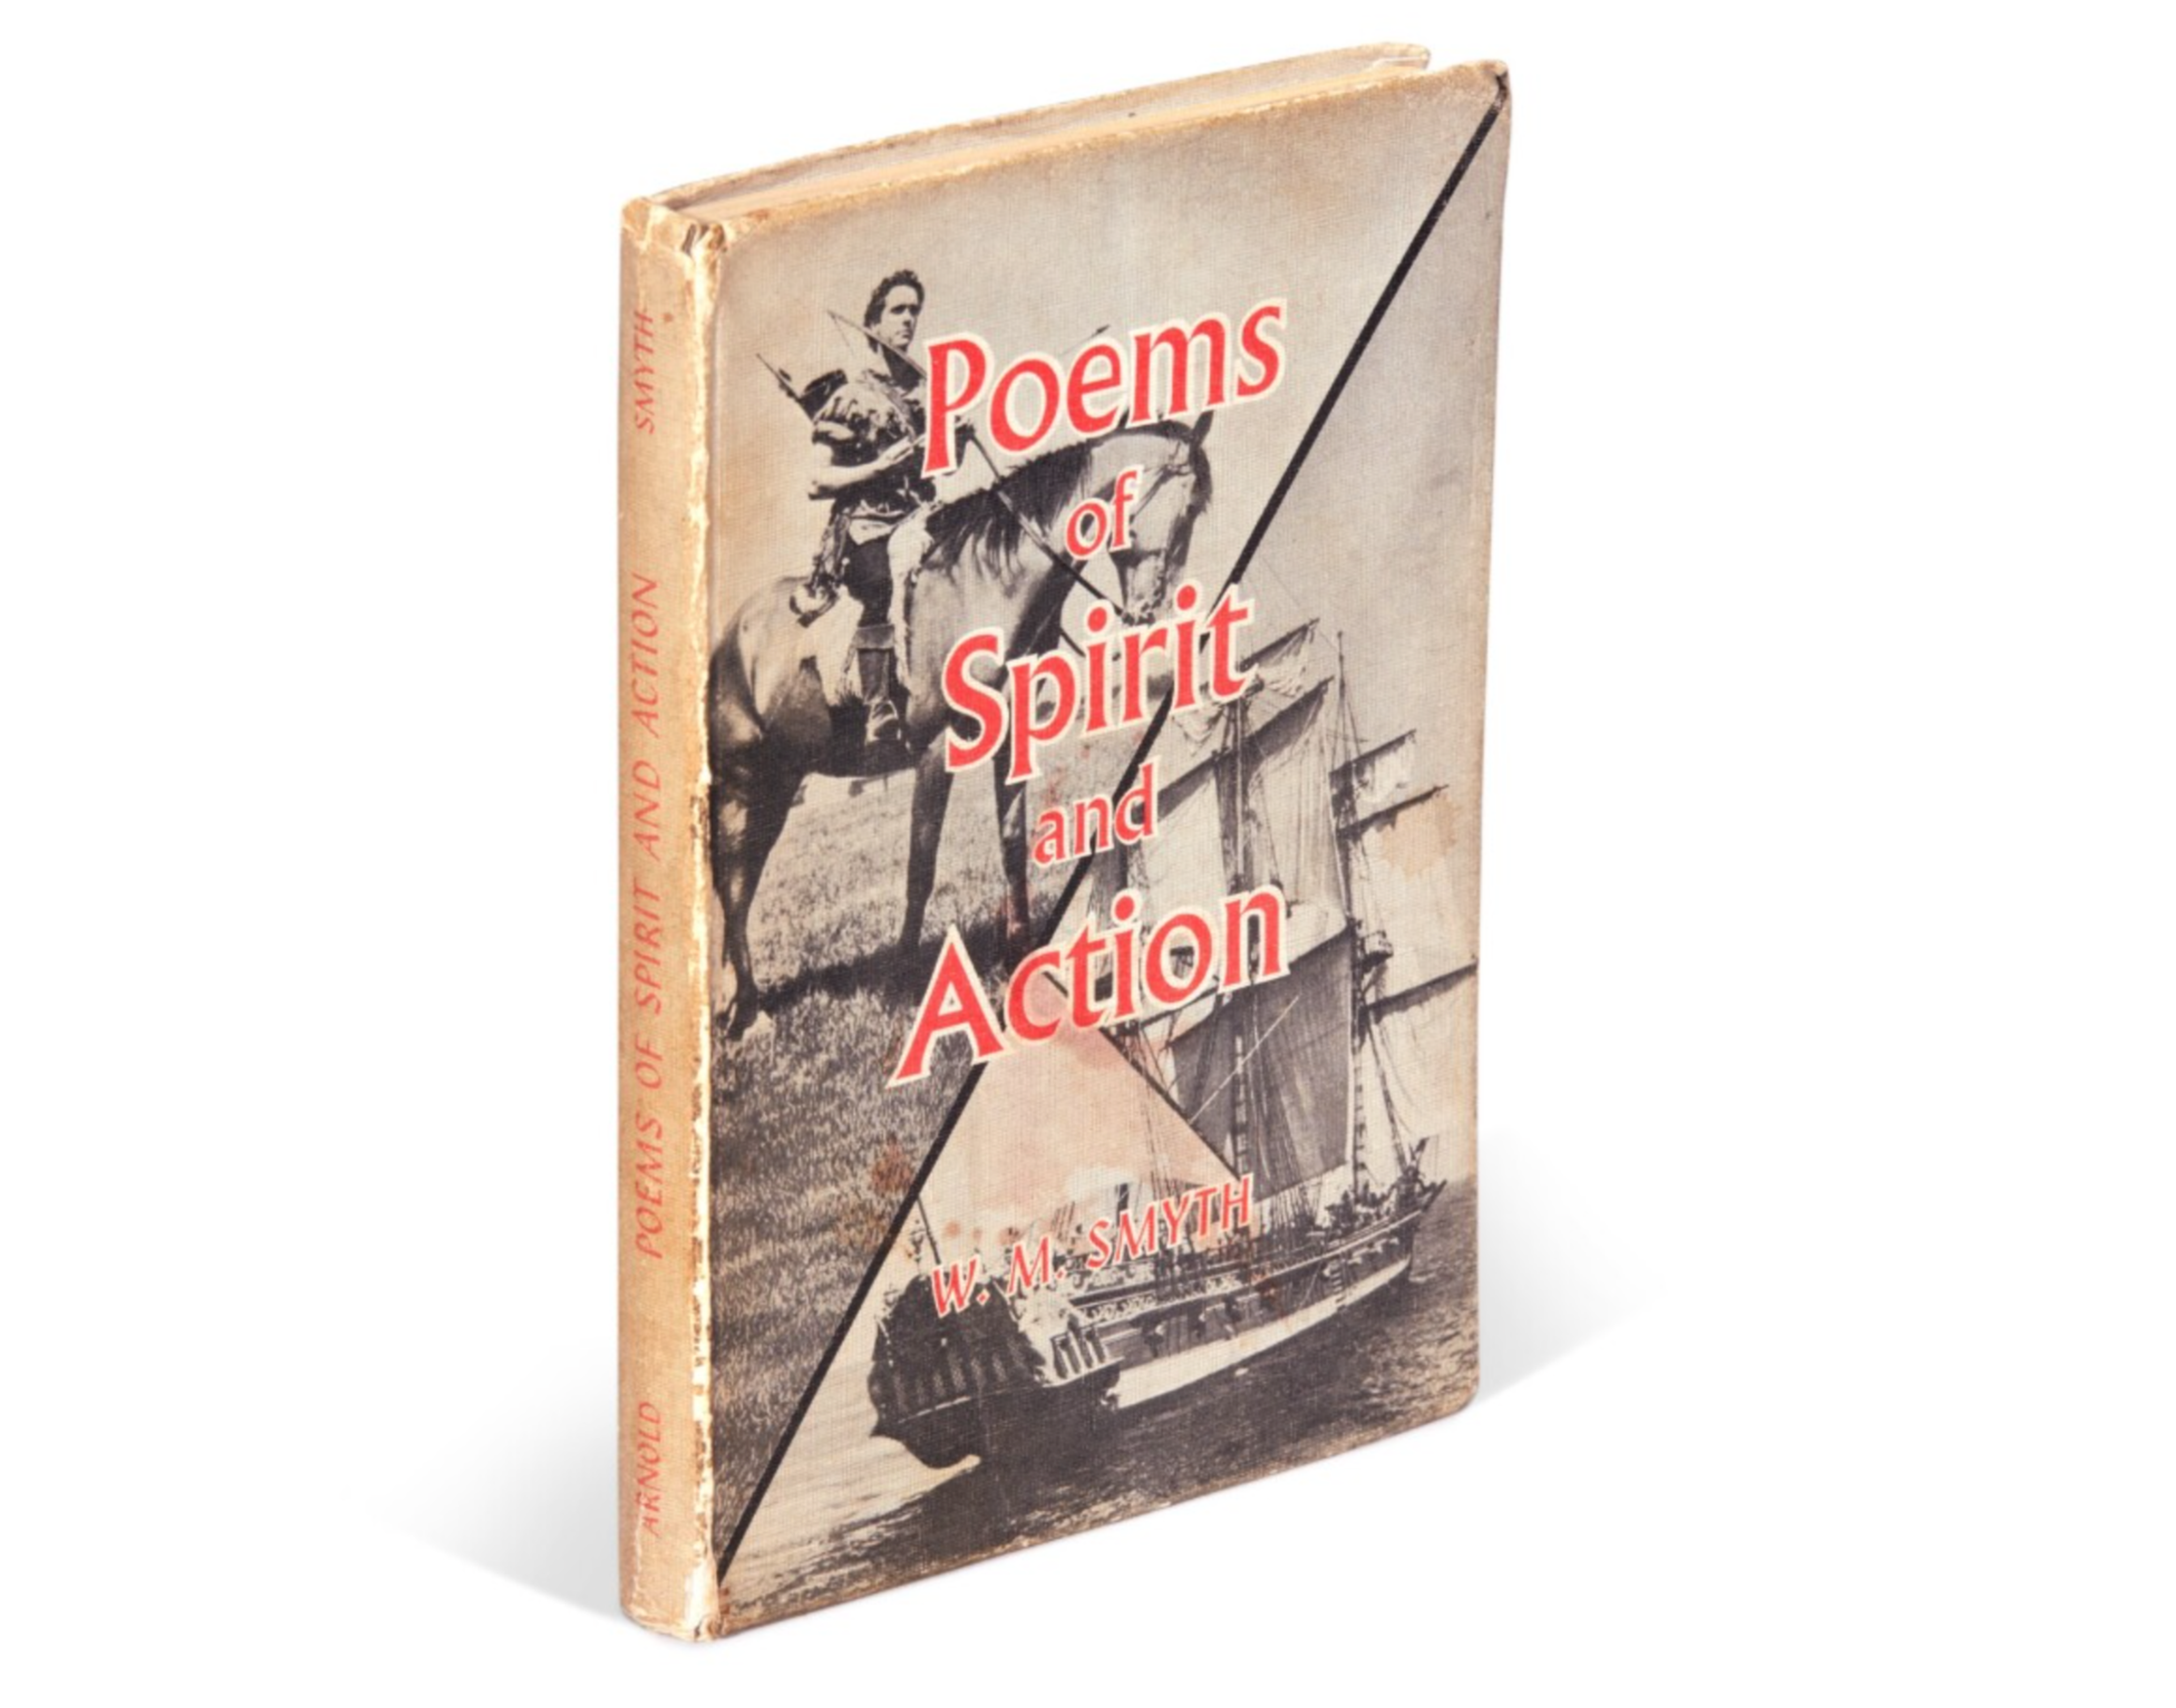 An image of the book Poems of Spirit and Action by W.M. Smyth, 1964 edition. The cover shows a man riding a horse on the top left corner, and a large sail boat on the bottom right corner.